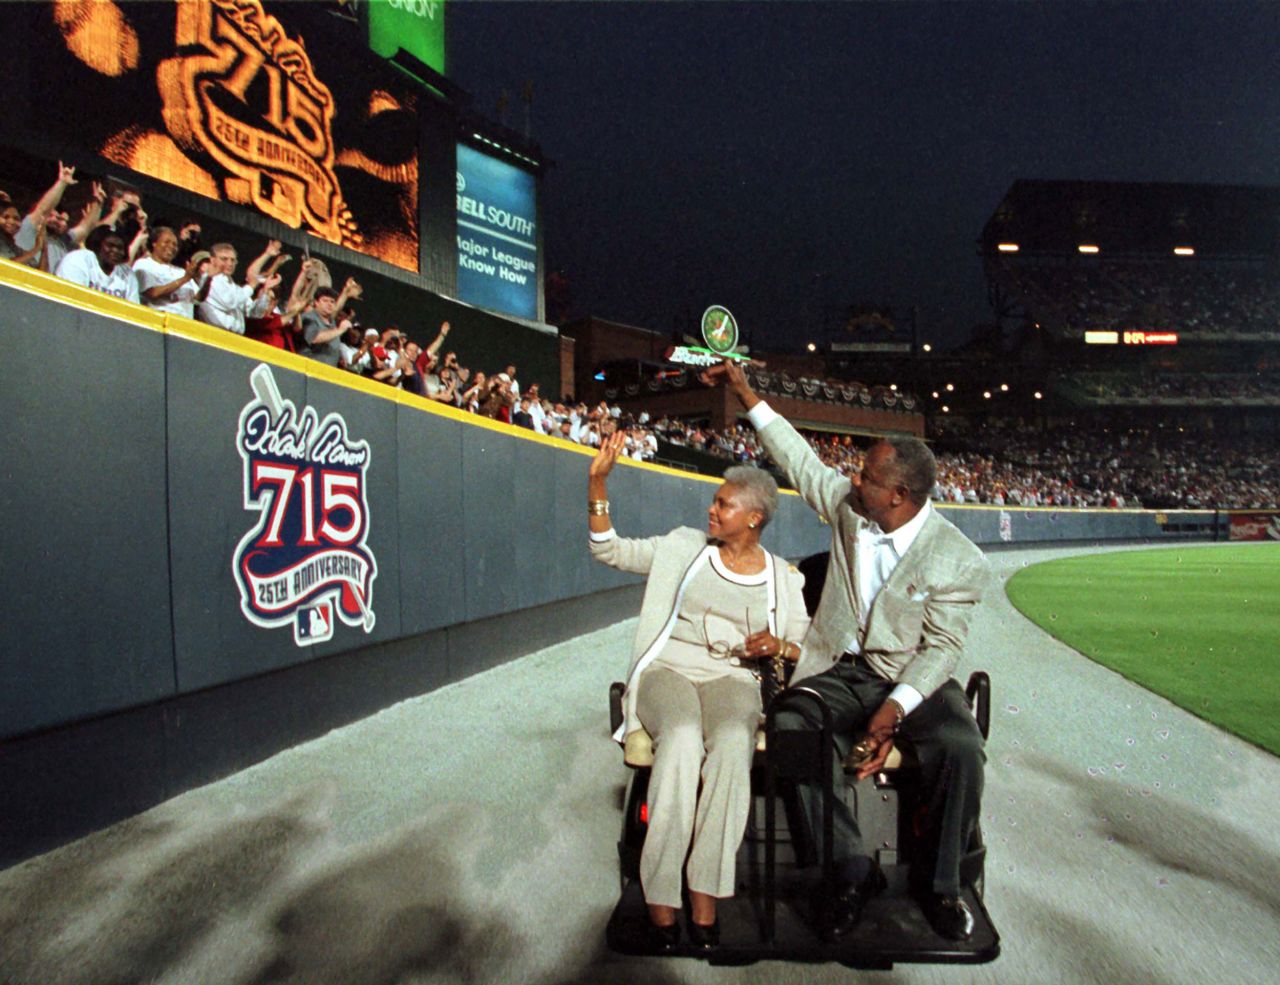 Aaron and his wife, Billye, wave to fans as they take a lap around Atlanta's Turner Field for the 25th anniversary of his 715th home run.